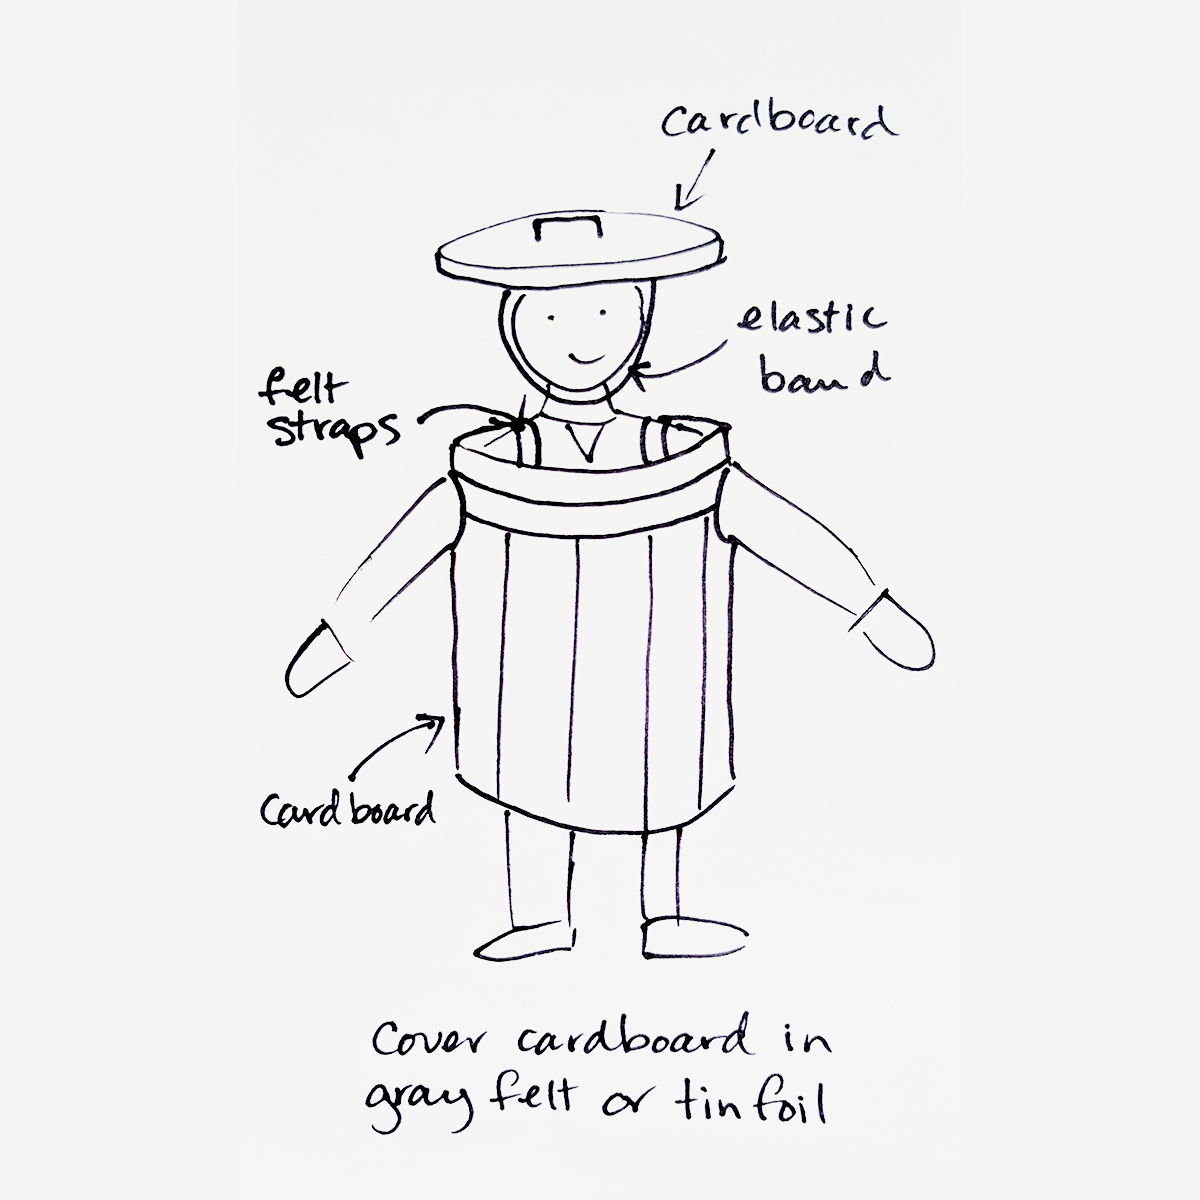 Trash Can: A drawing of a kid wearing a gray outfit with a trash can inspired coverall and headband 